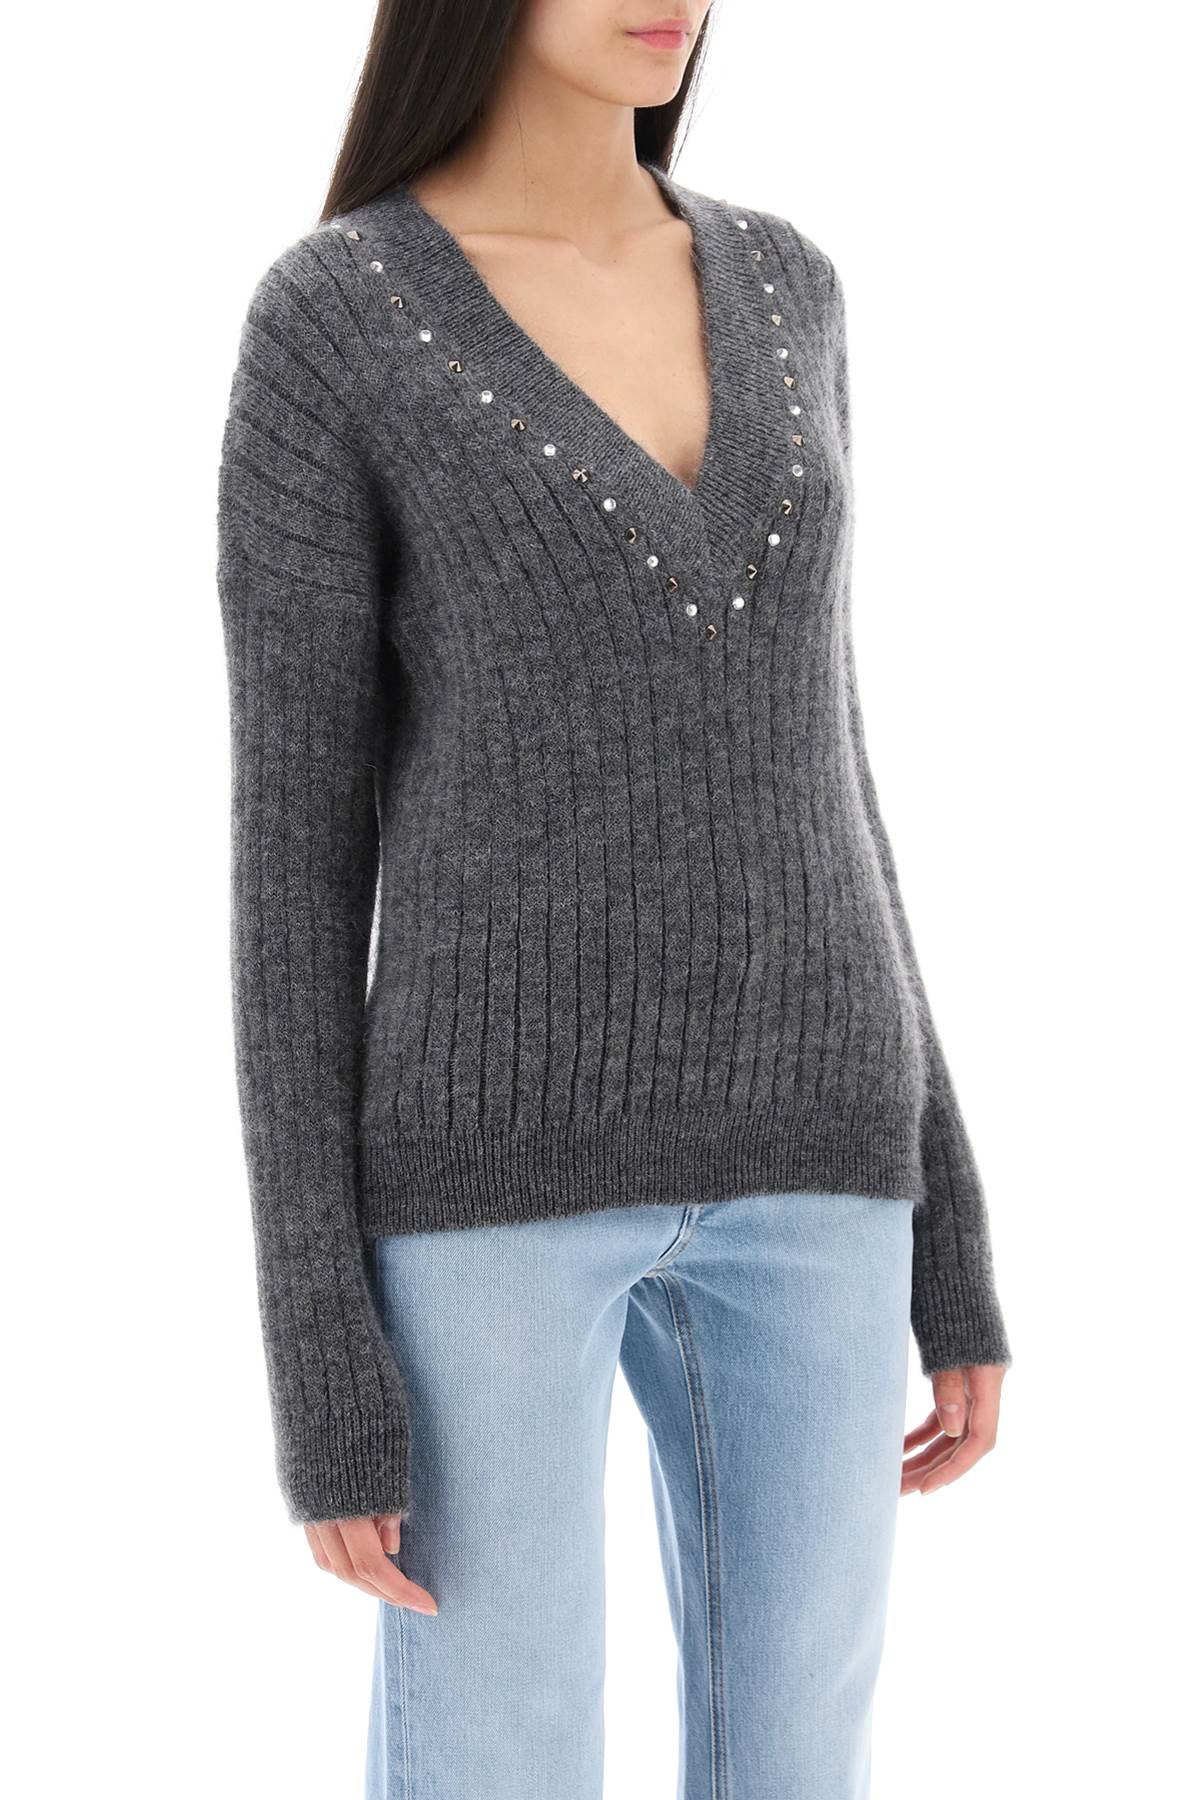 Alessandra rich wool knit sweater with studs and crystals-1